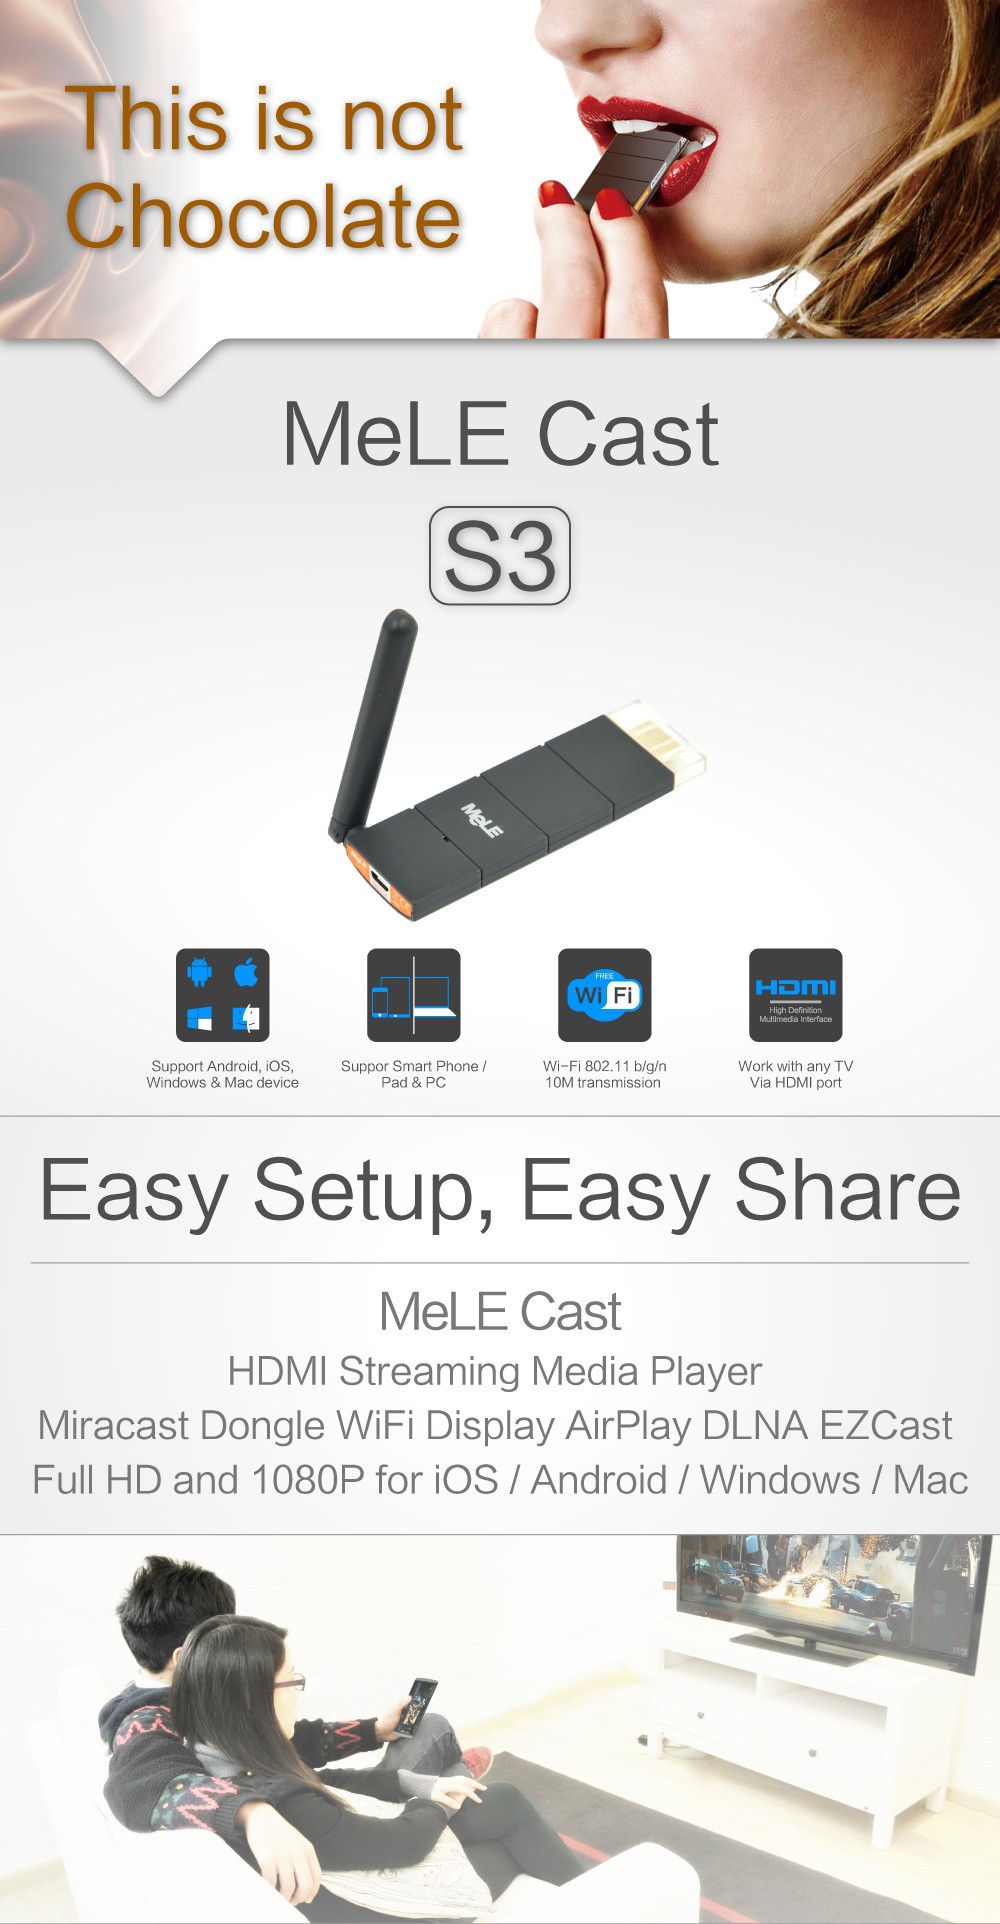 MeLE Cast S3  It is the latest model of HDMI miracast dongle from MeLE, MeLE Cast S3 has much enchanced performance with external WiFi antenna compared to MeLE Cast S1. This is not Chocolate. Easy Setup, Easy Share  MeLE Cast  HDMI Streaming Media Player Miracast Dongle WiFi Display AirPlay DLNA EZCast Full HD and 1080P for iOS / Android / Windows / Mac